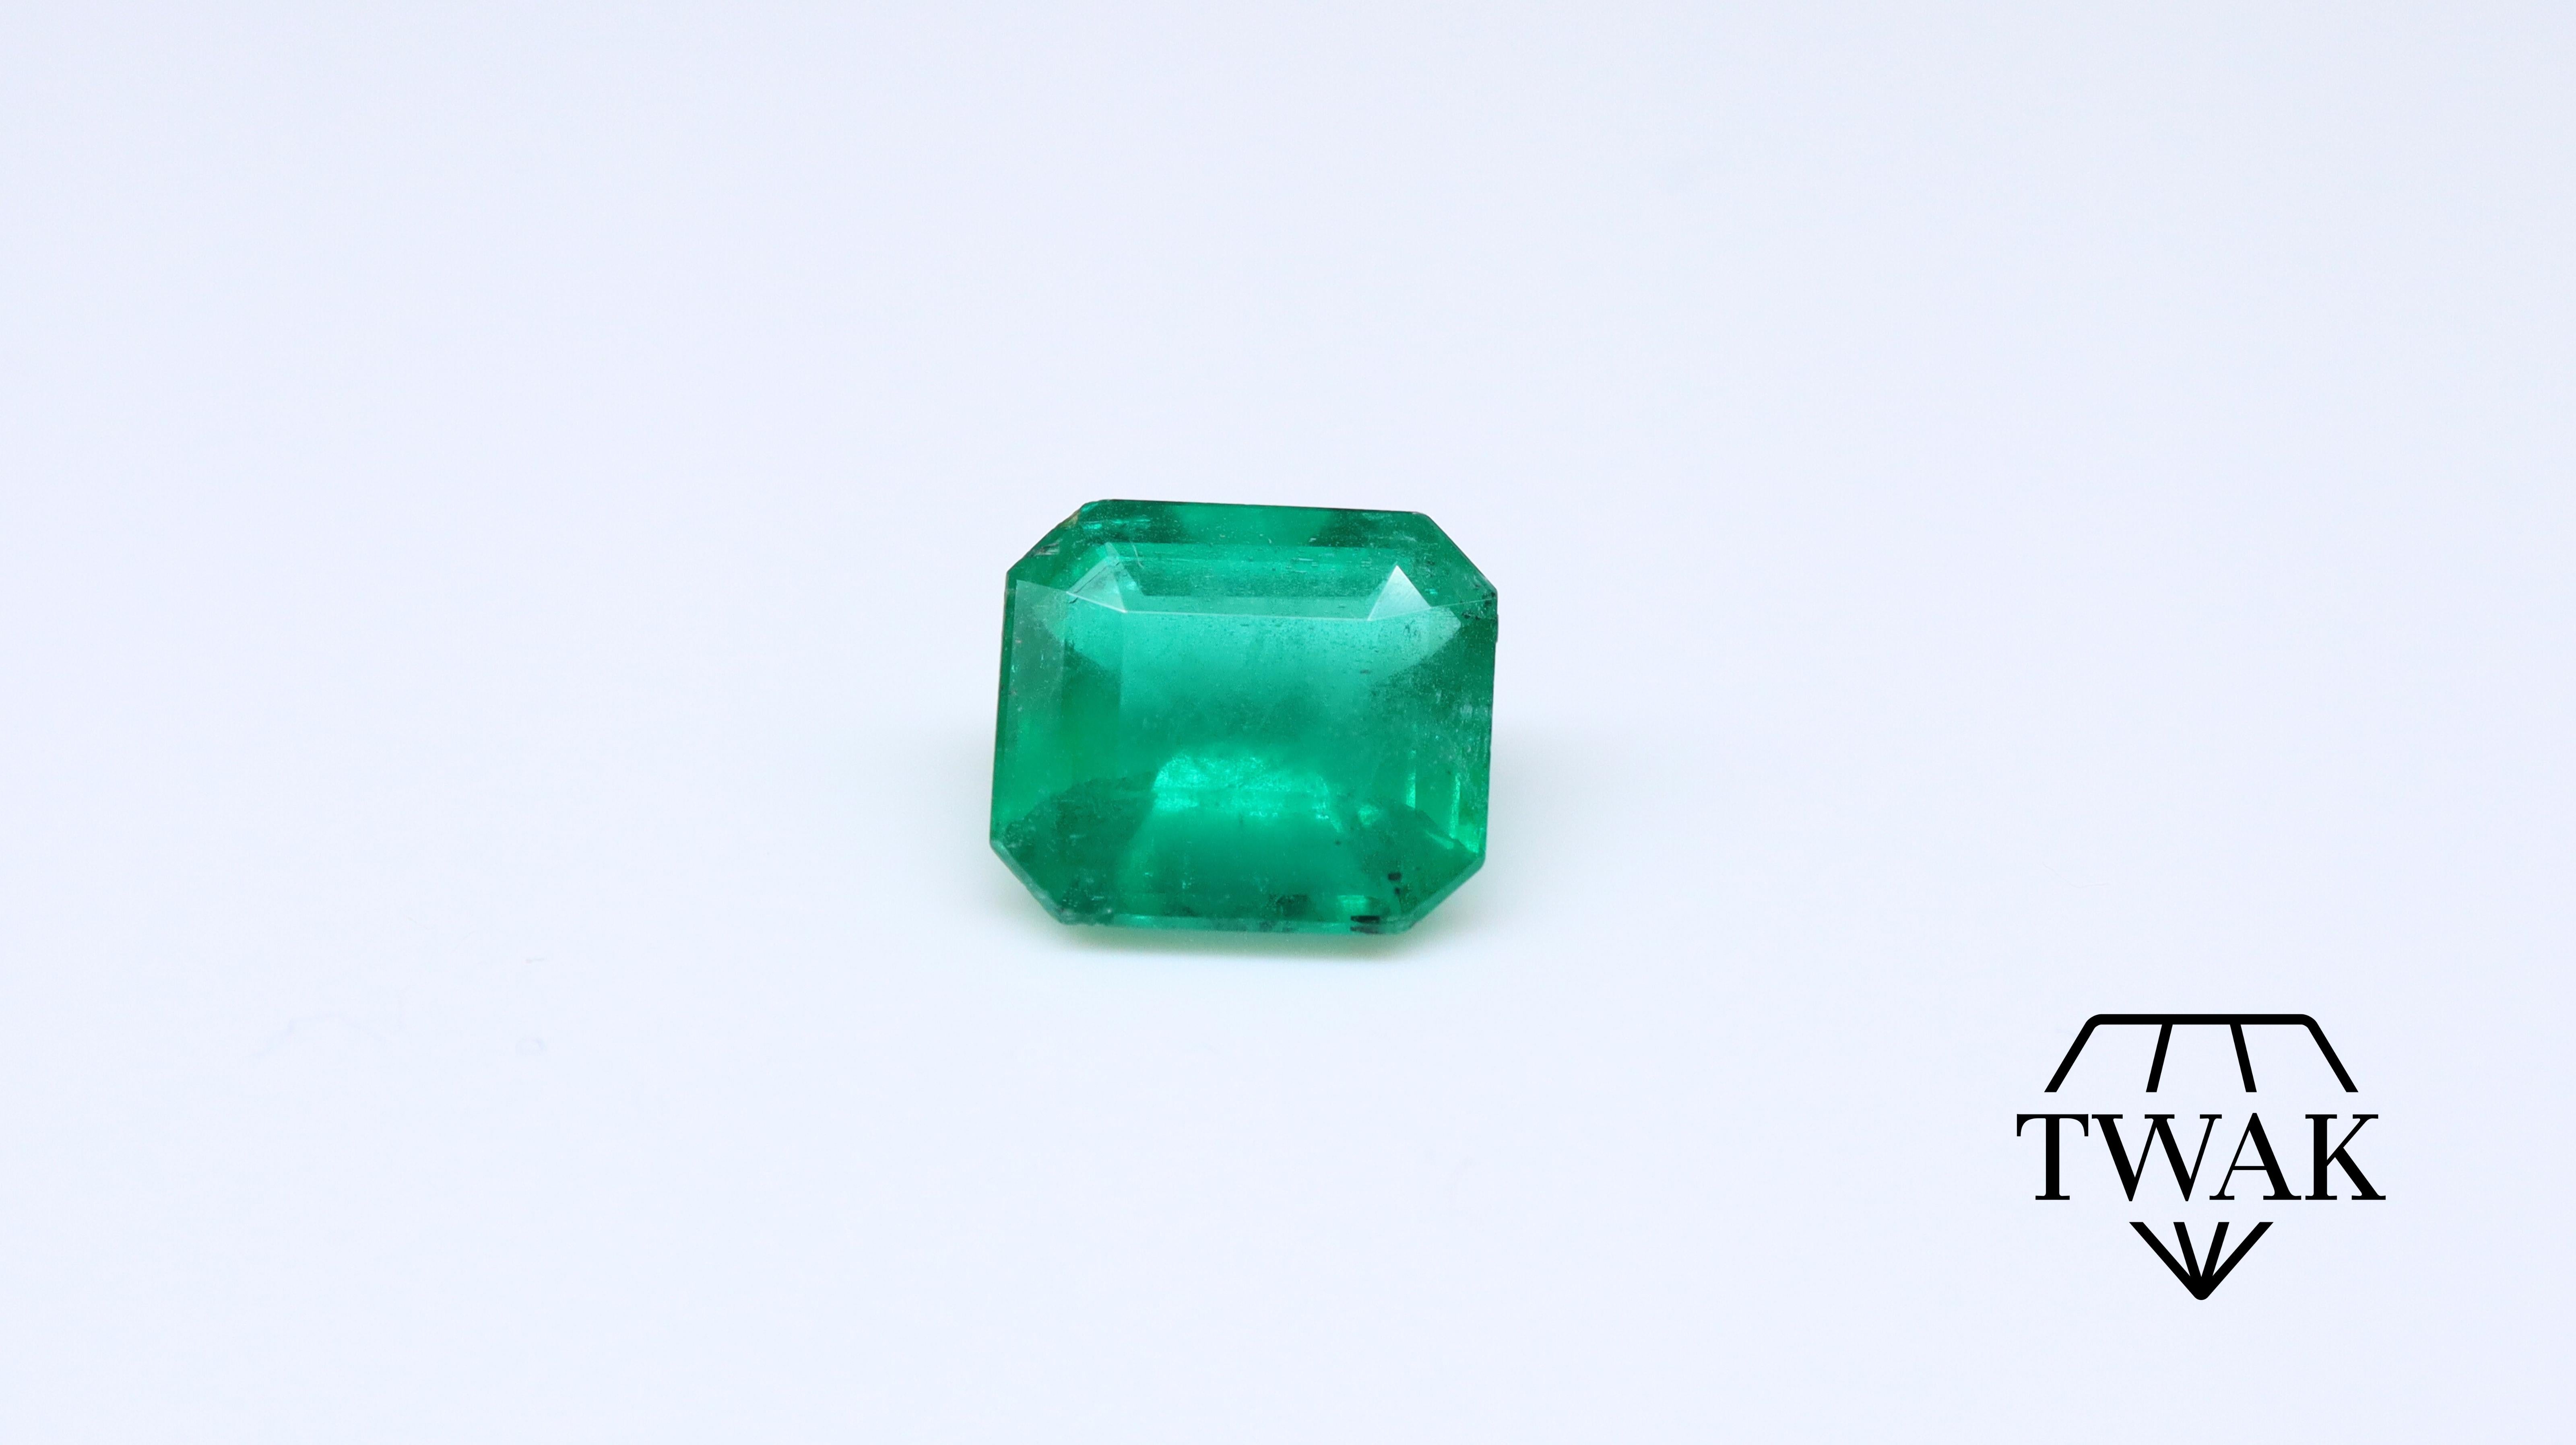 A beautiful Emerald with excellent color, crystal, and saturation.

Details and description:
Dimensions: 7.31 x 8.36 x 4.58mm
Weight: 1.89ct
Color: Vivid Green 
Treatment: Opticom

Emeralds are naturally porous and inclusive stones, with surface